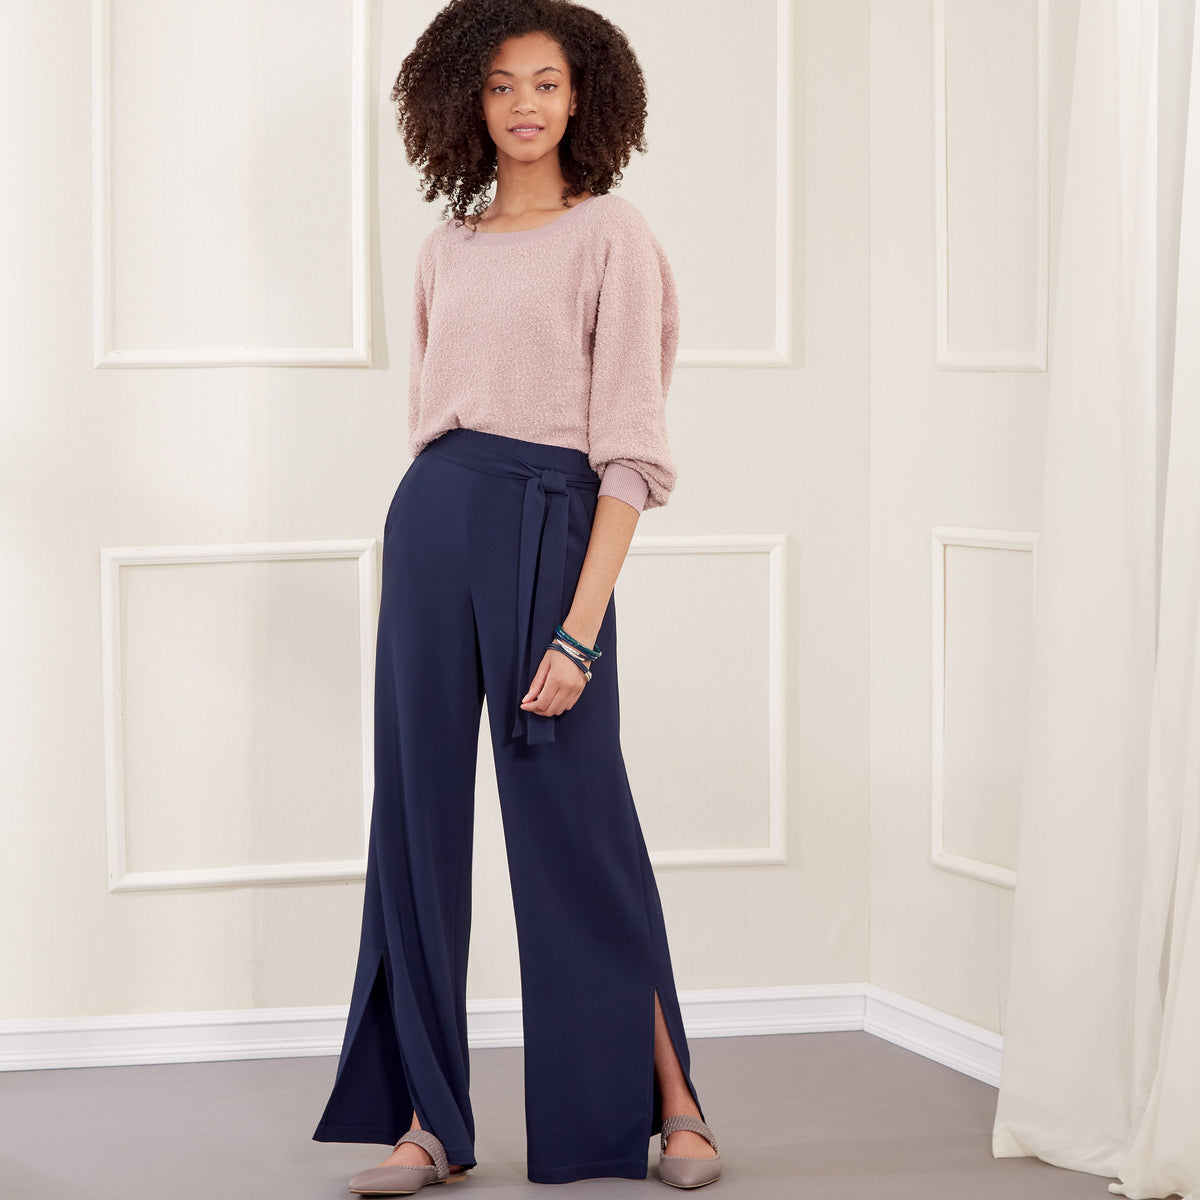 New Look 6691 Slim Or Flared Pants Pattern — jaycotts.co.uk - Sewing ...